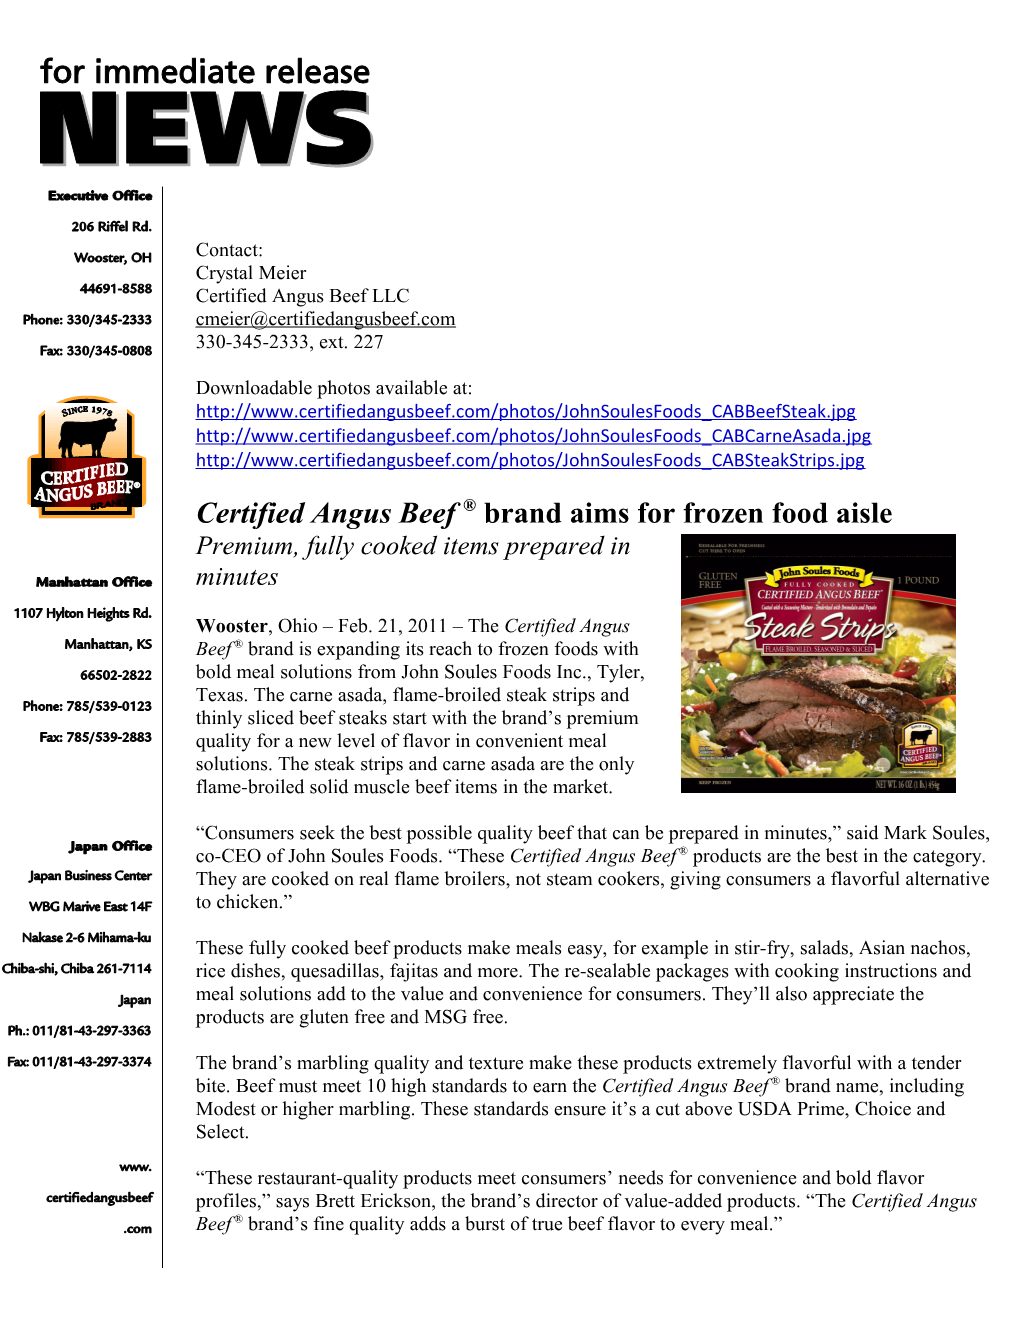 Certified Angus Beef Brand Aims for Frozen Food Aisle